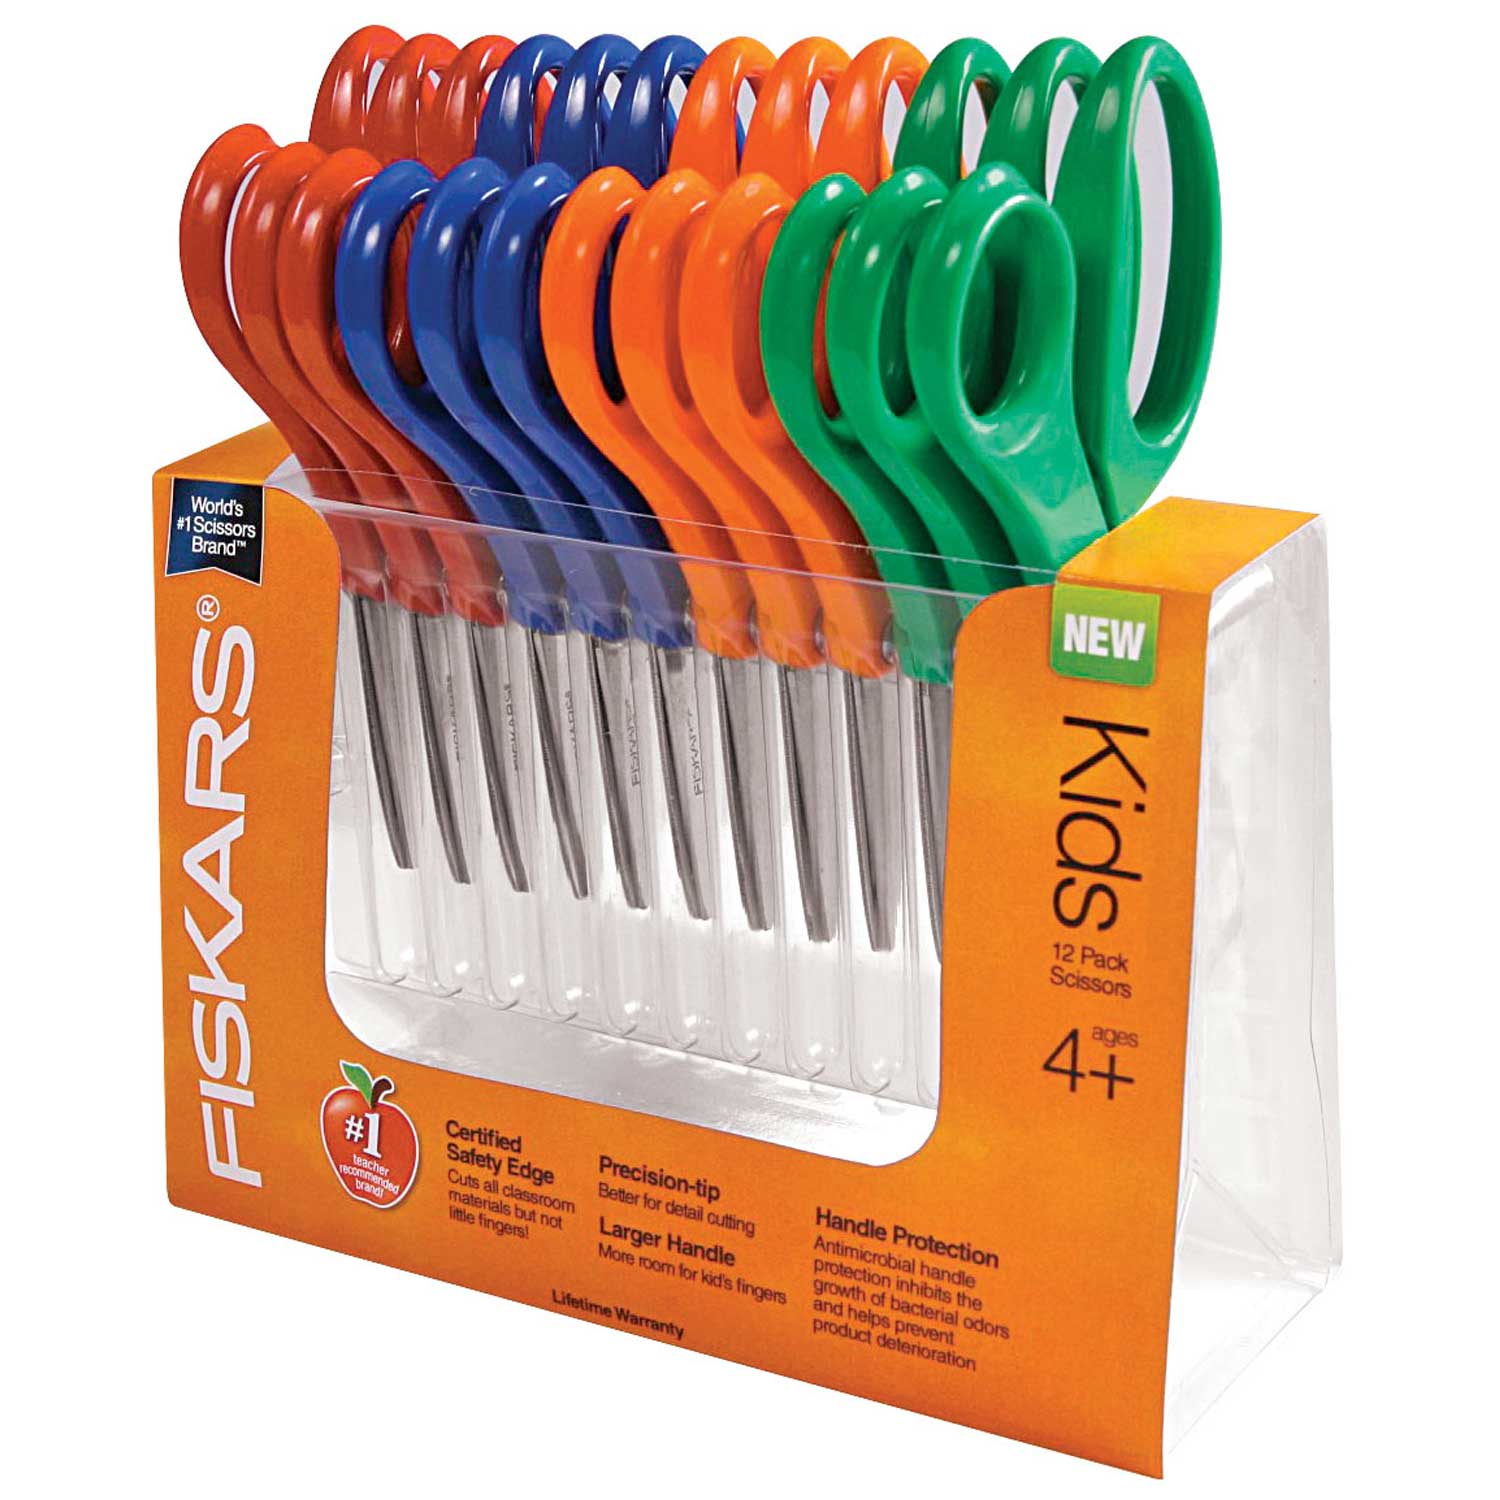 GCP Products 90 Pack Scissors Bulk For Kids Safety Blunt Tip